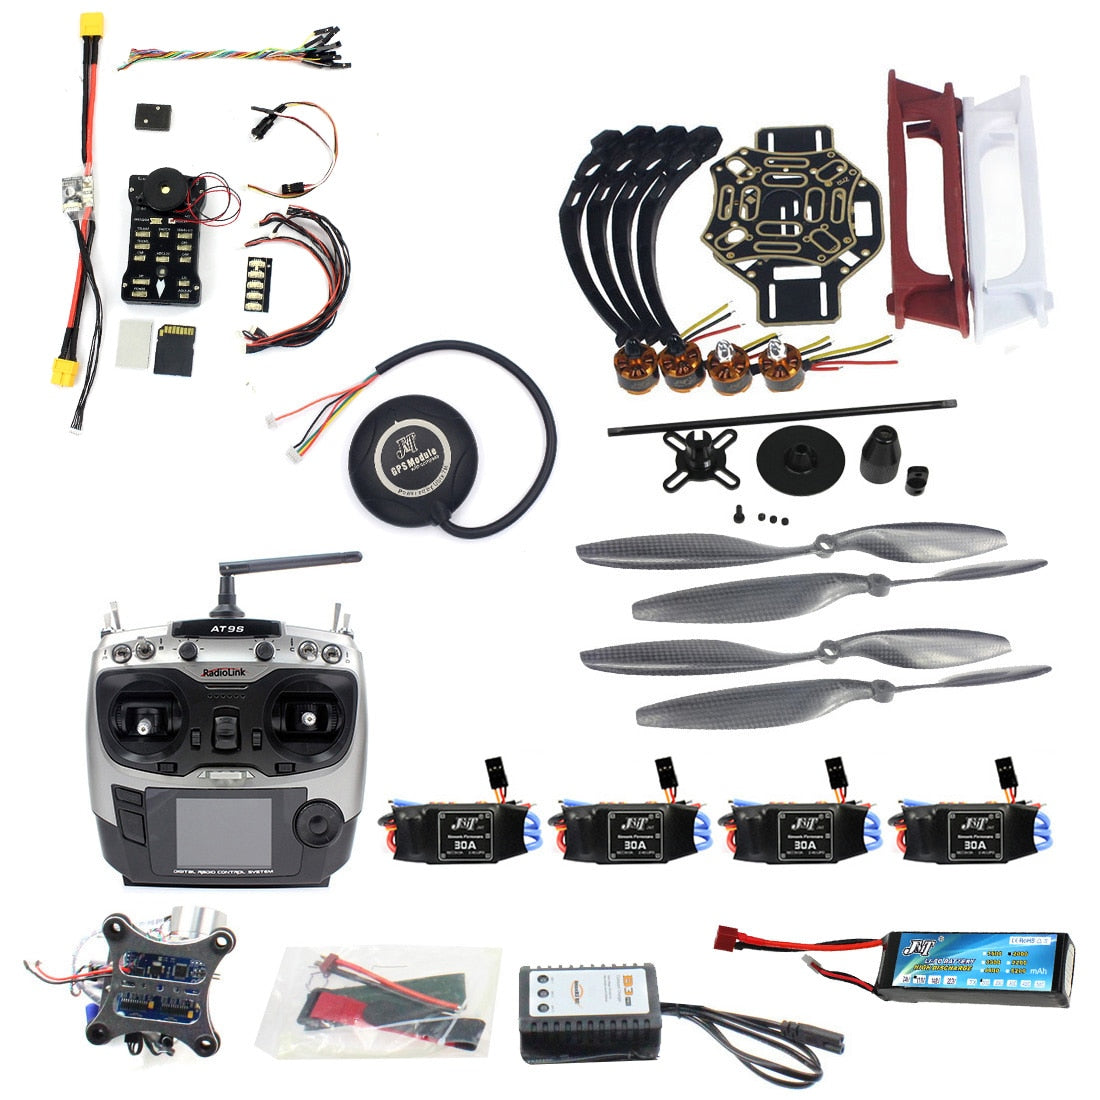 DIY RC FPV Drone Kit 4-axis Quadcopter - with F450 Frame PIXHAWK PXI PX4 Flight Control 920KV Motor GPS AT9S Transmitter Receiver